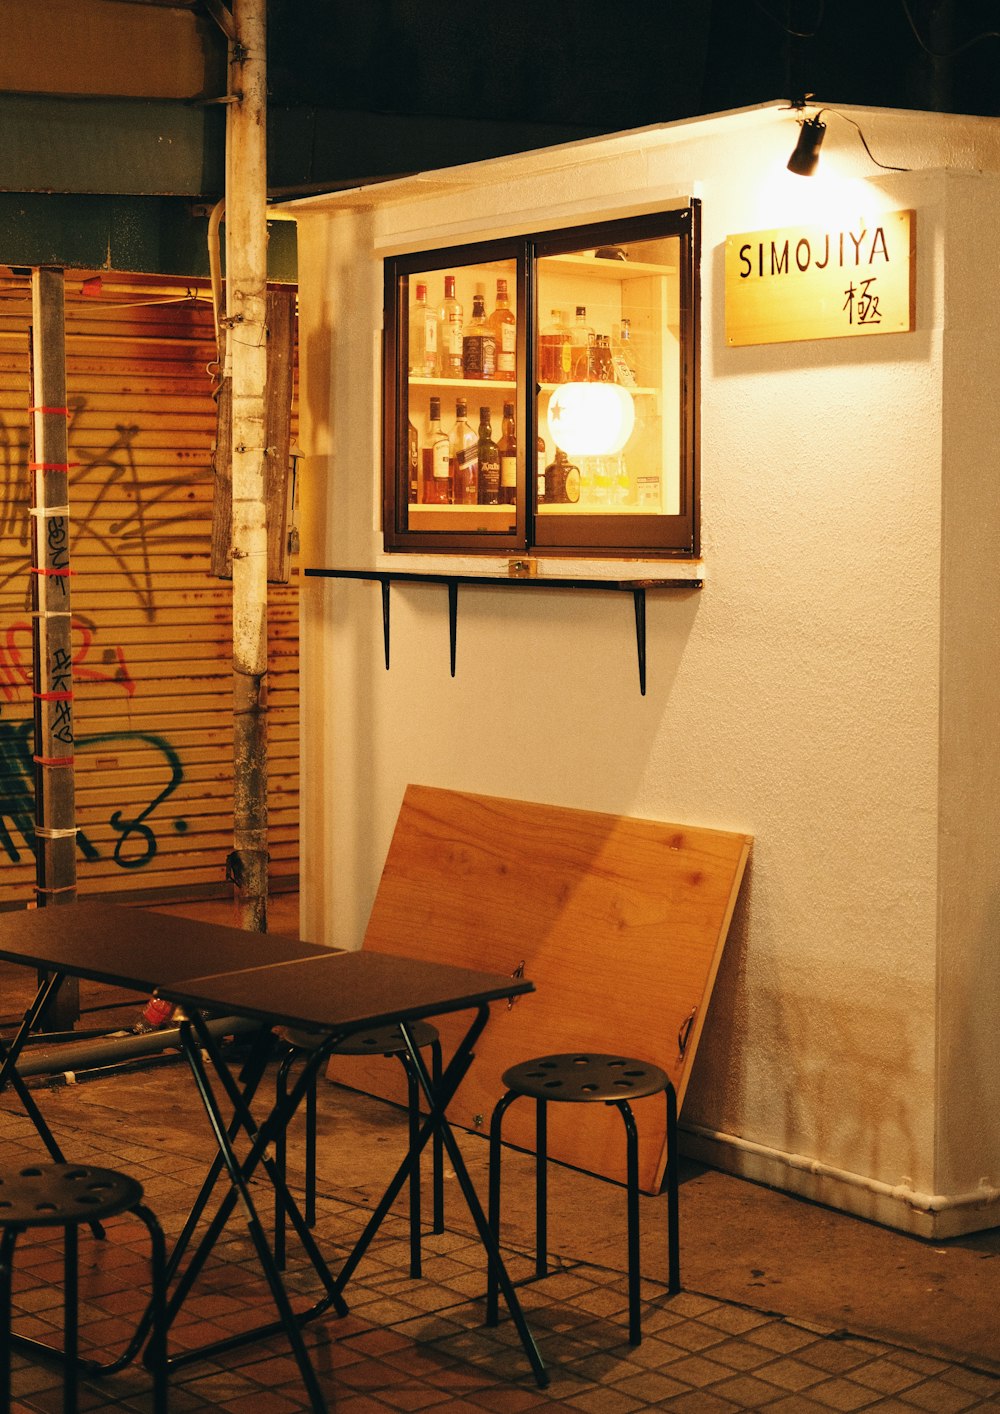 a table and chairs outside of a restaurant